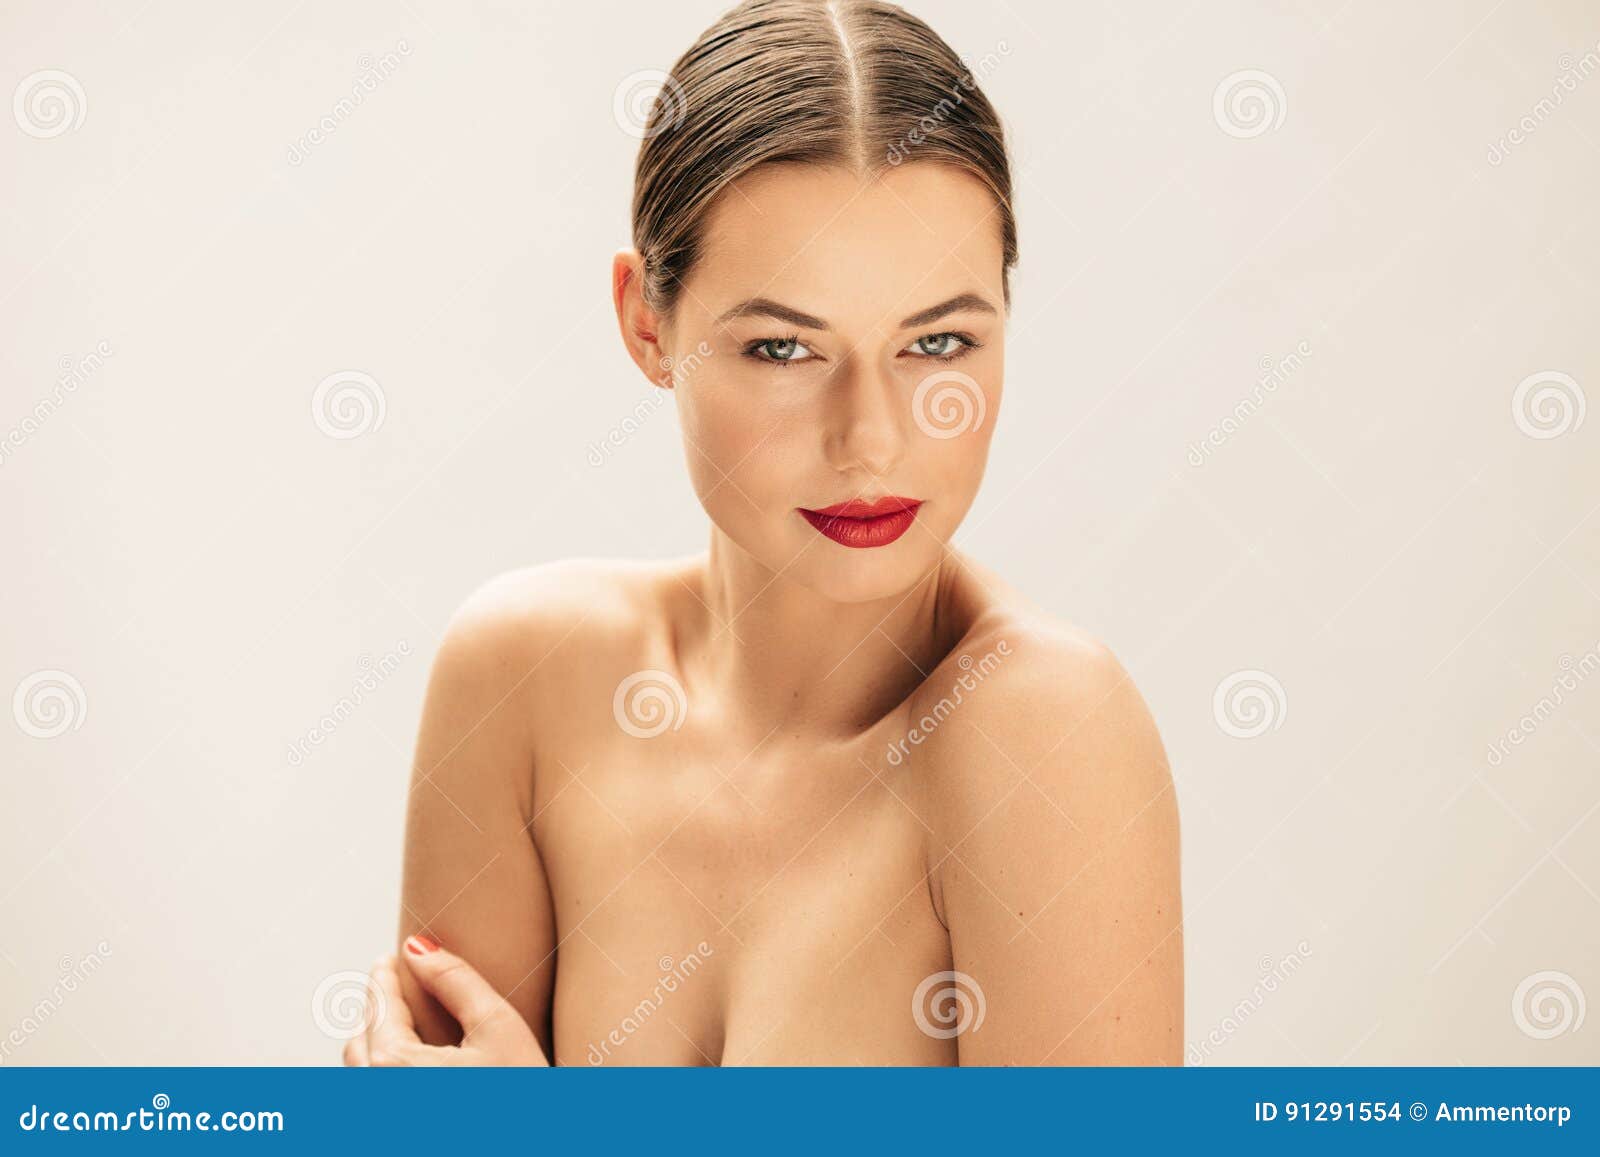 Topless women models-naked photo